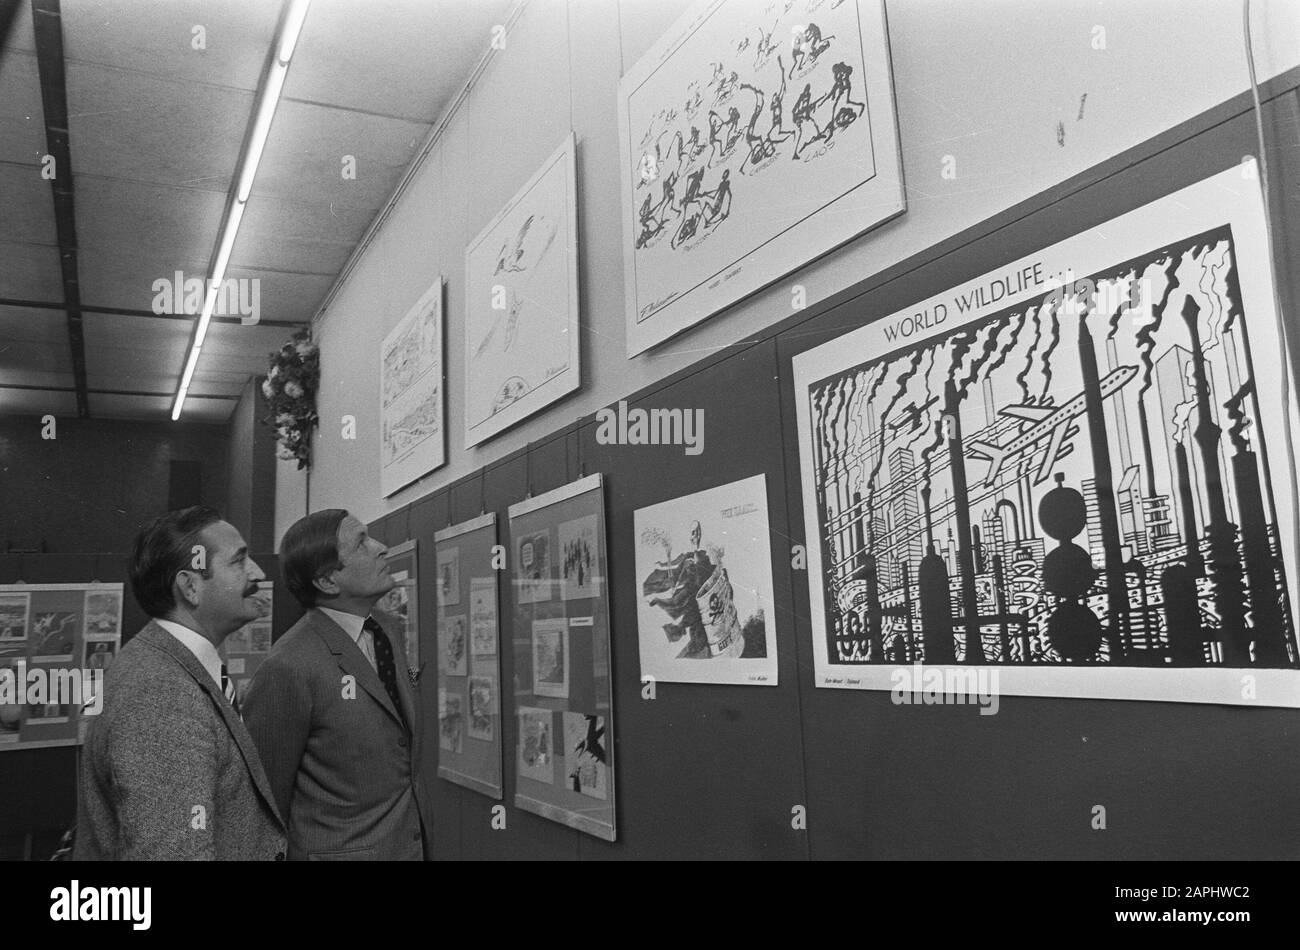 Prince Claus opens an exhibition of cartoons in the building of the Parool Description: The prince and cartoonist Fritz Behrendt watch cartoons Date: November 9, 1973 Location: Amsterdam, Noord-Holland Keywords: cartoonists, cartoons, openings, princes, exhibitions Personal name: Behrendt, Fritz, Claus, prince Stock Photo